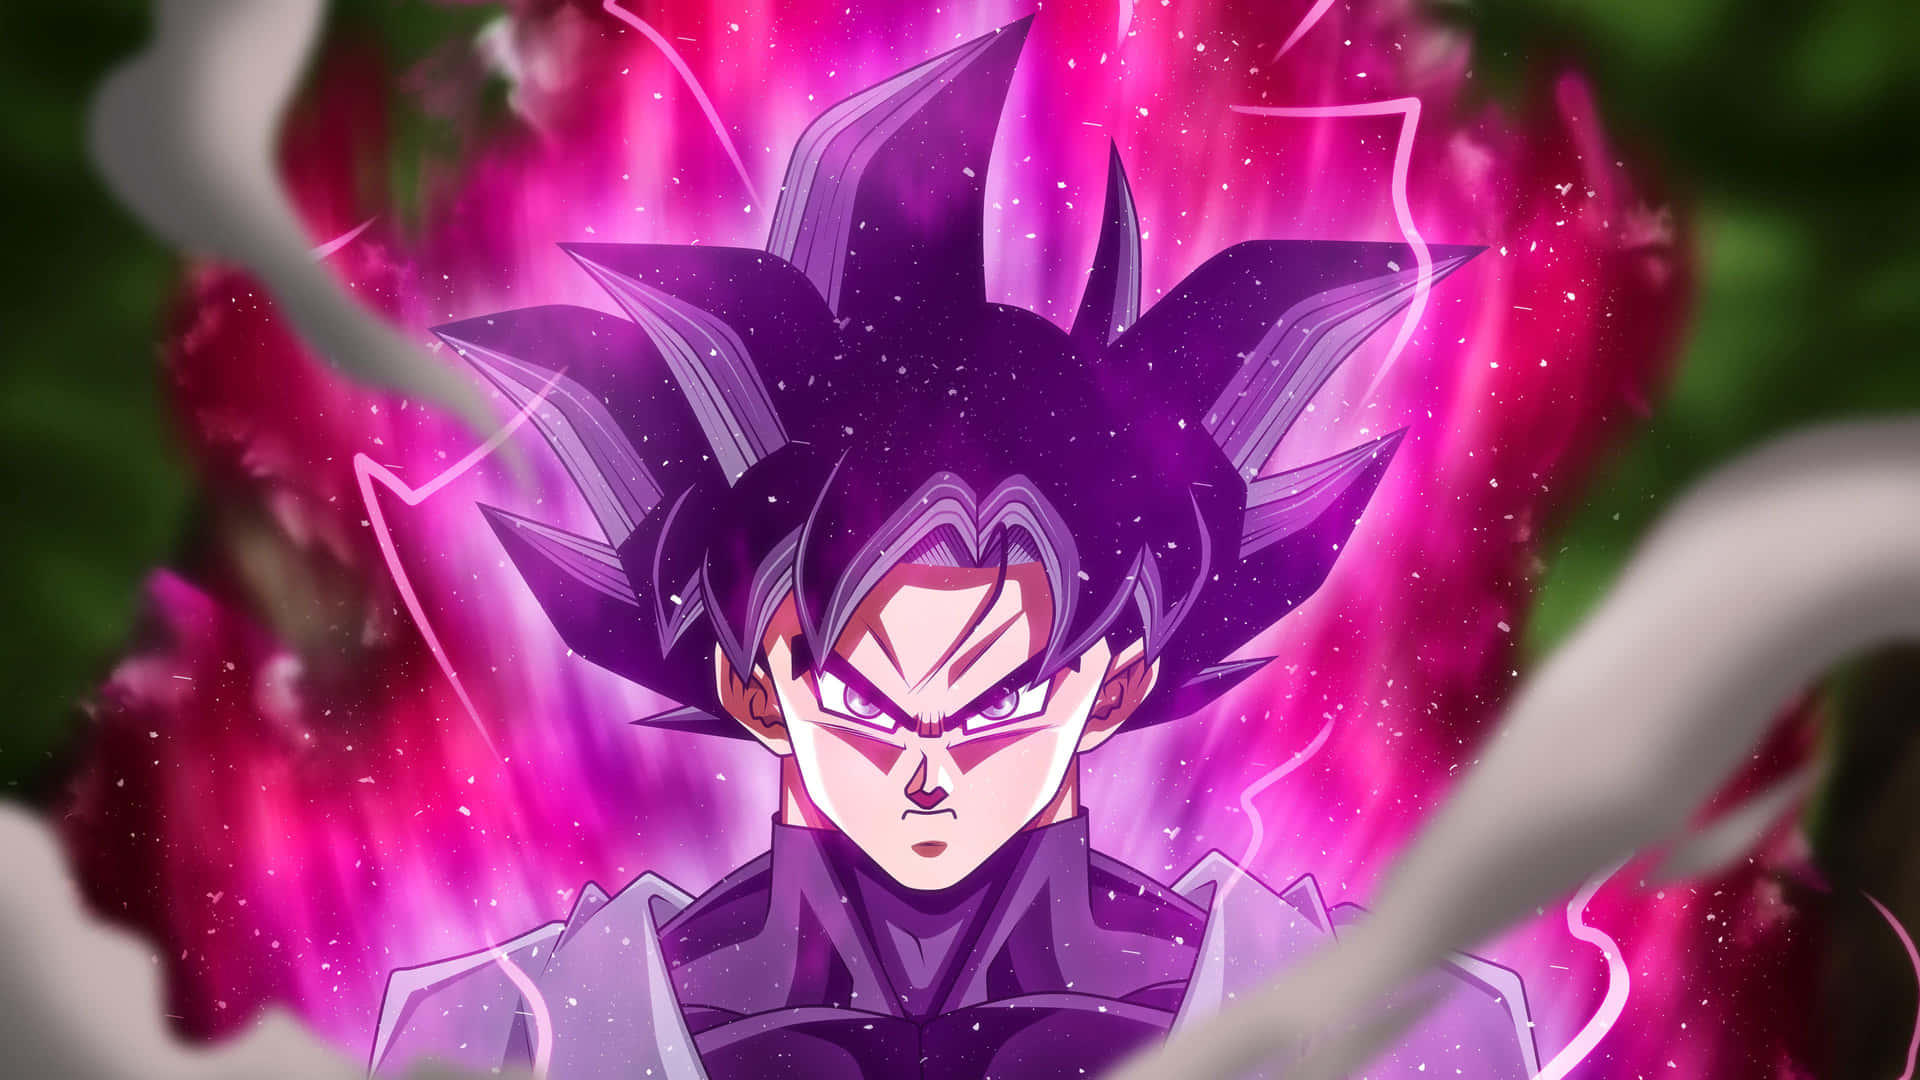 Goku Black unleashes a powerful attack in stunning 4K Wallpaper